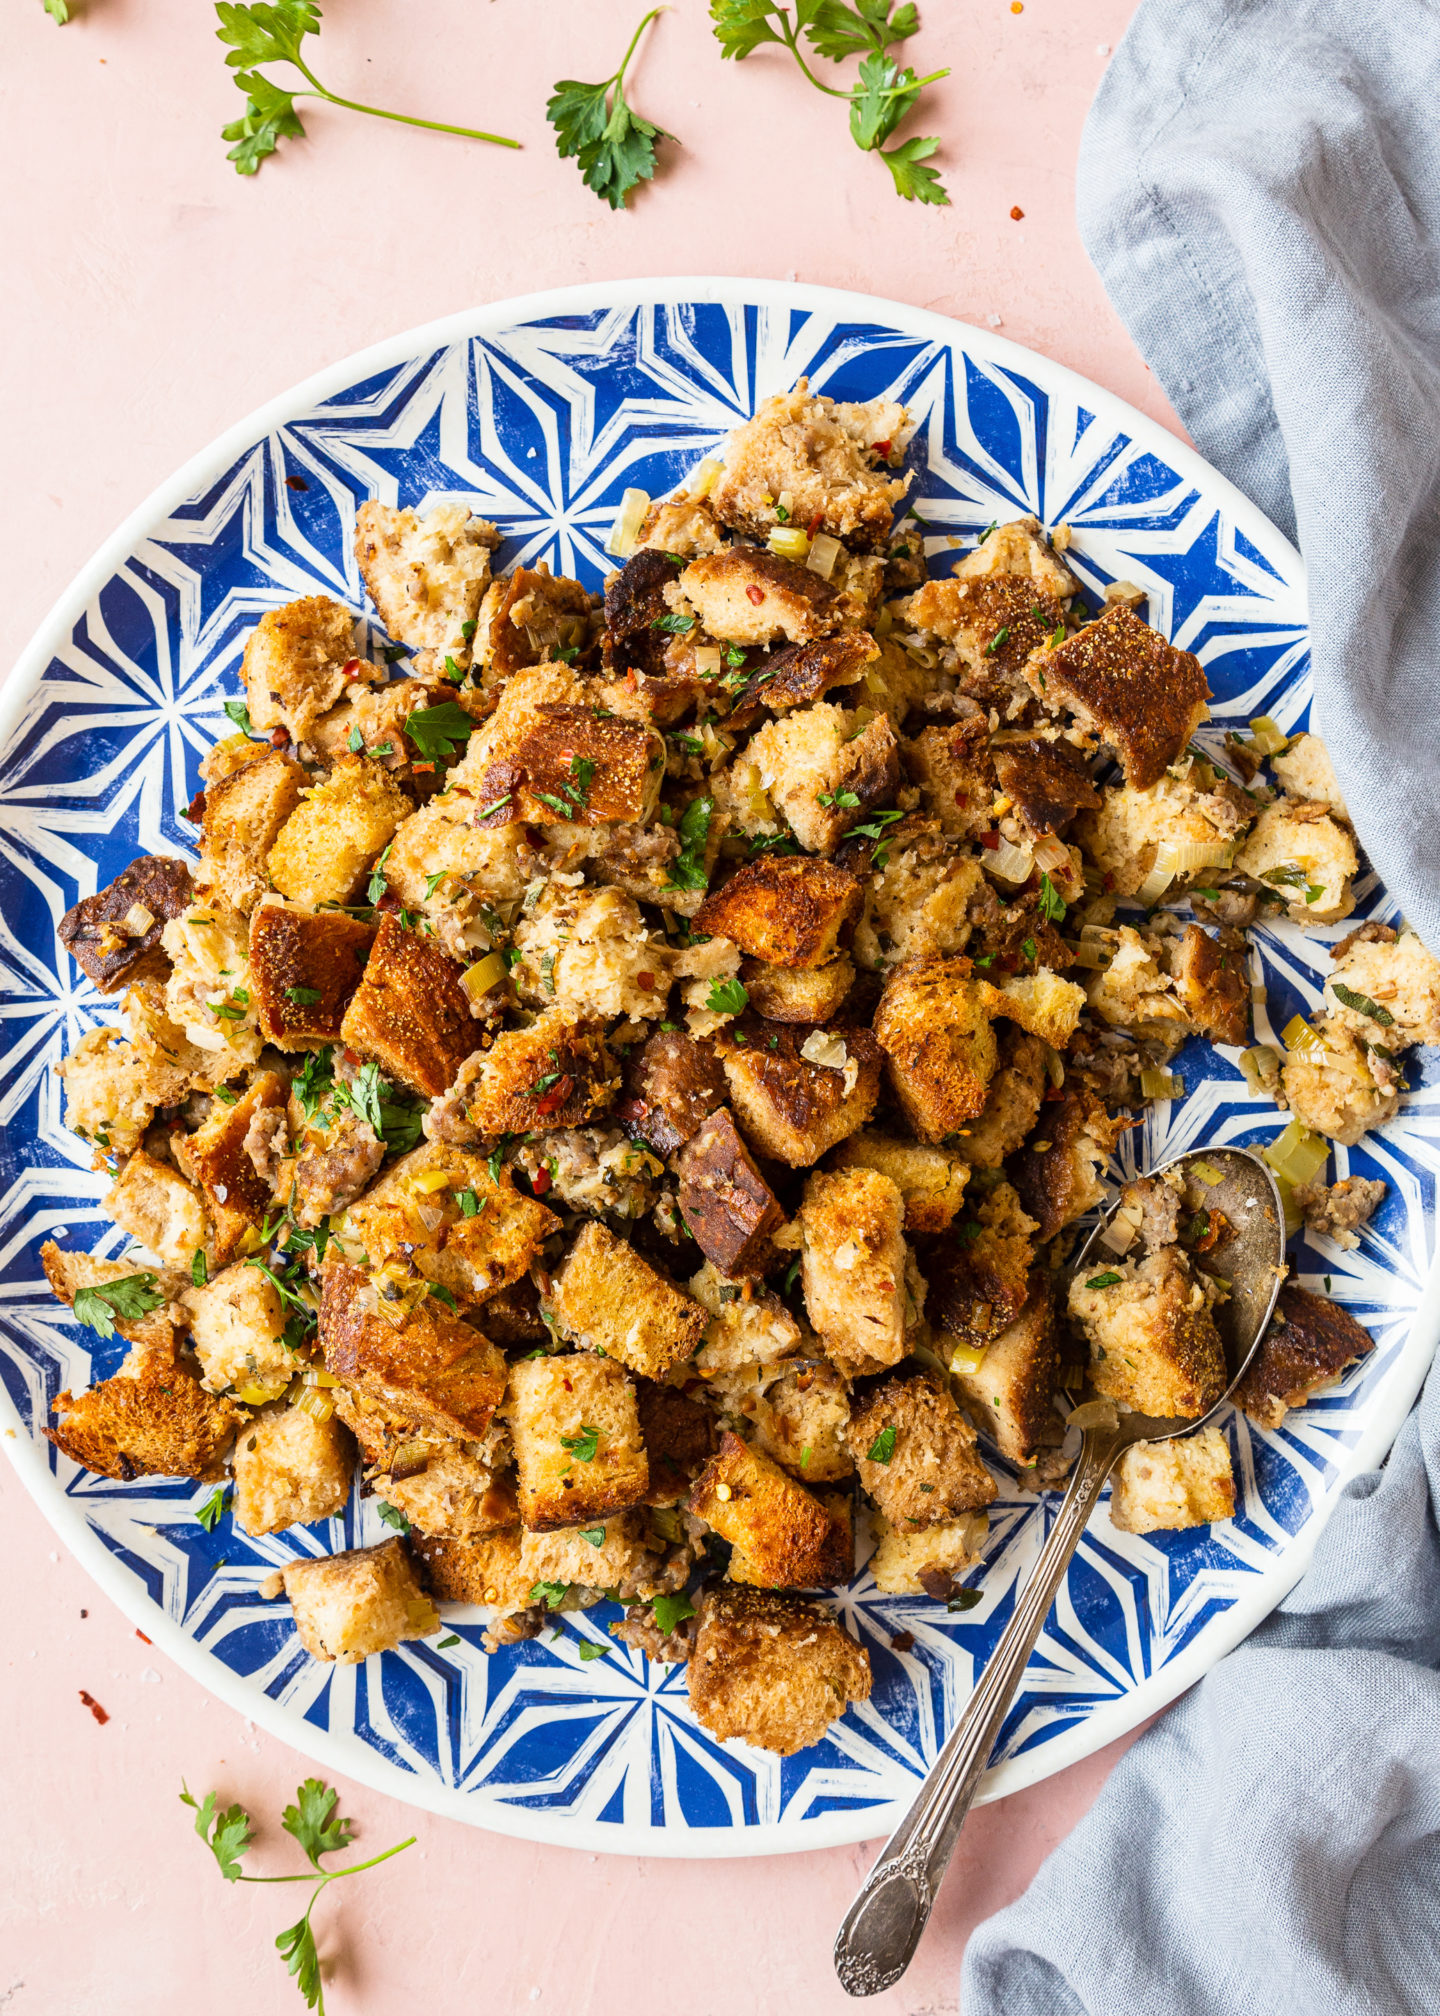 Sourdough and Sausage Stuffing